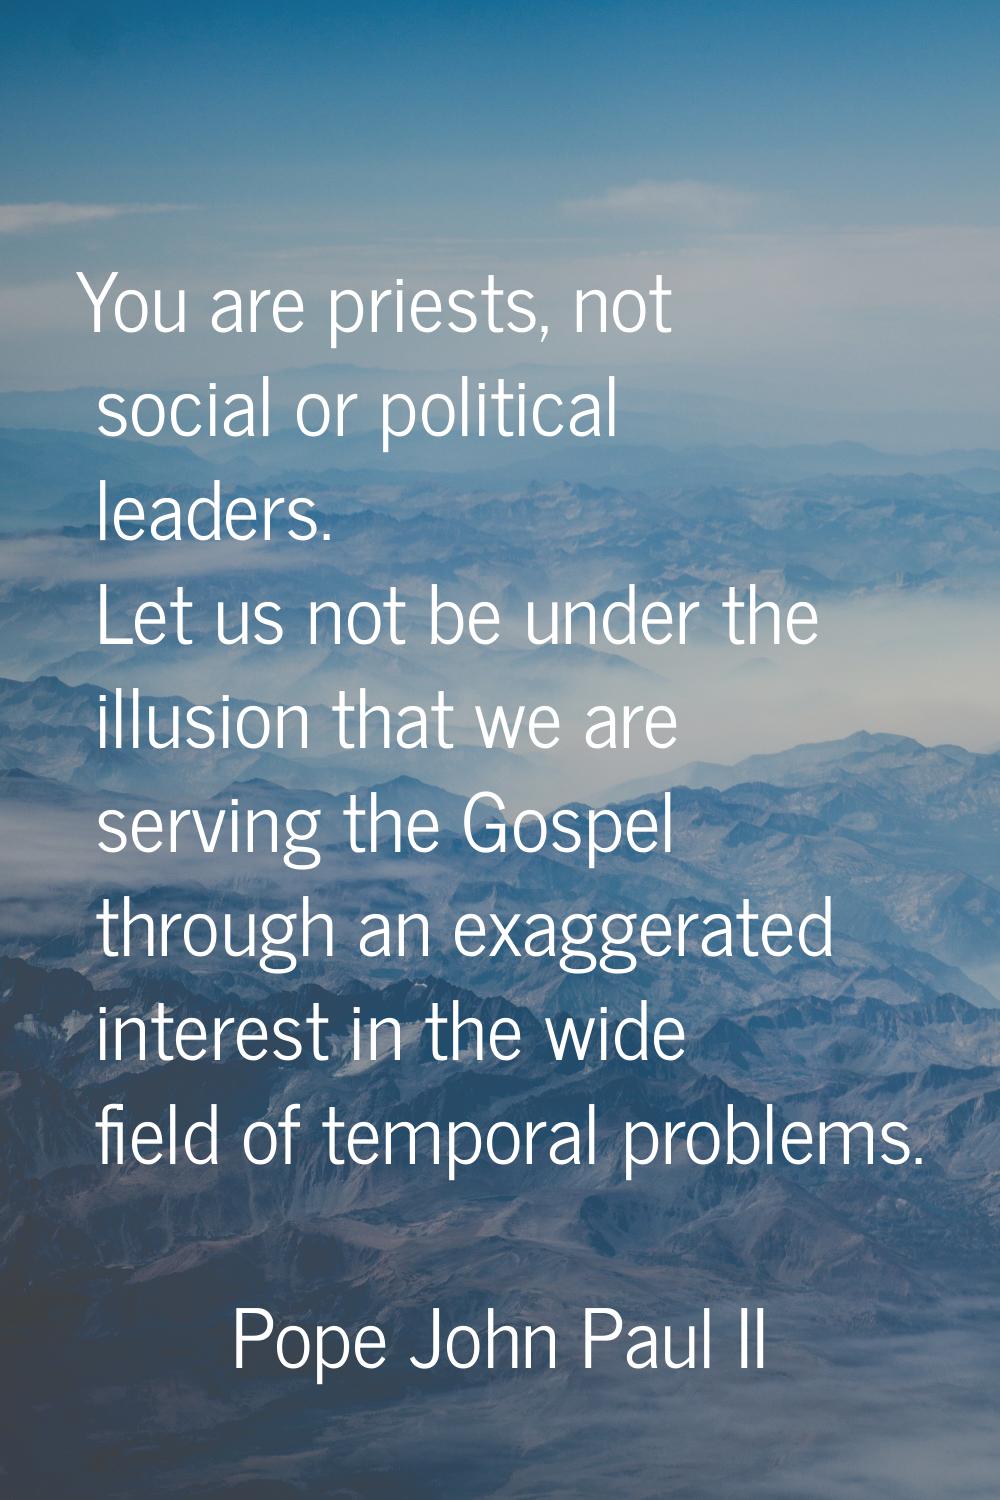 You are priests, not social or political leaders. Let us not be under the illusion that we are serv